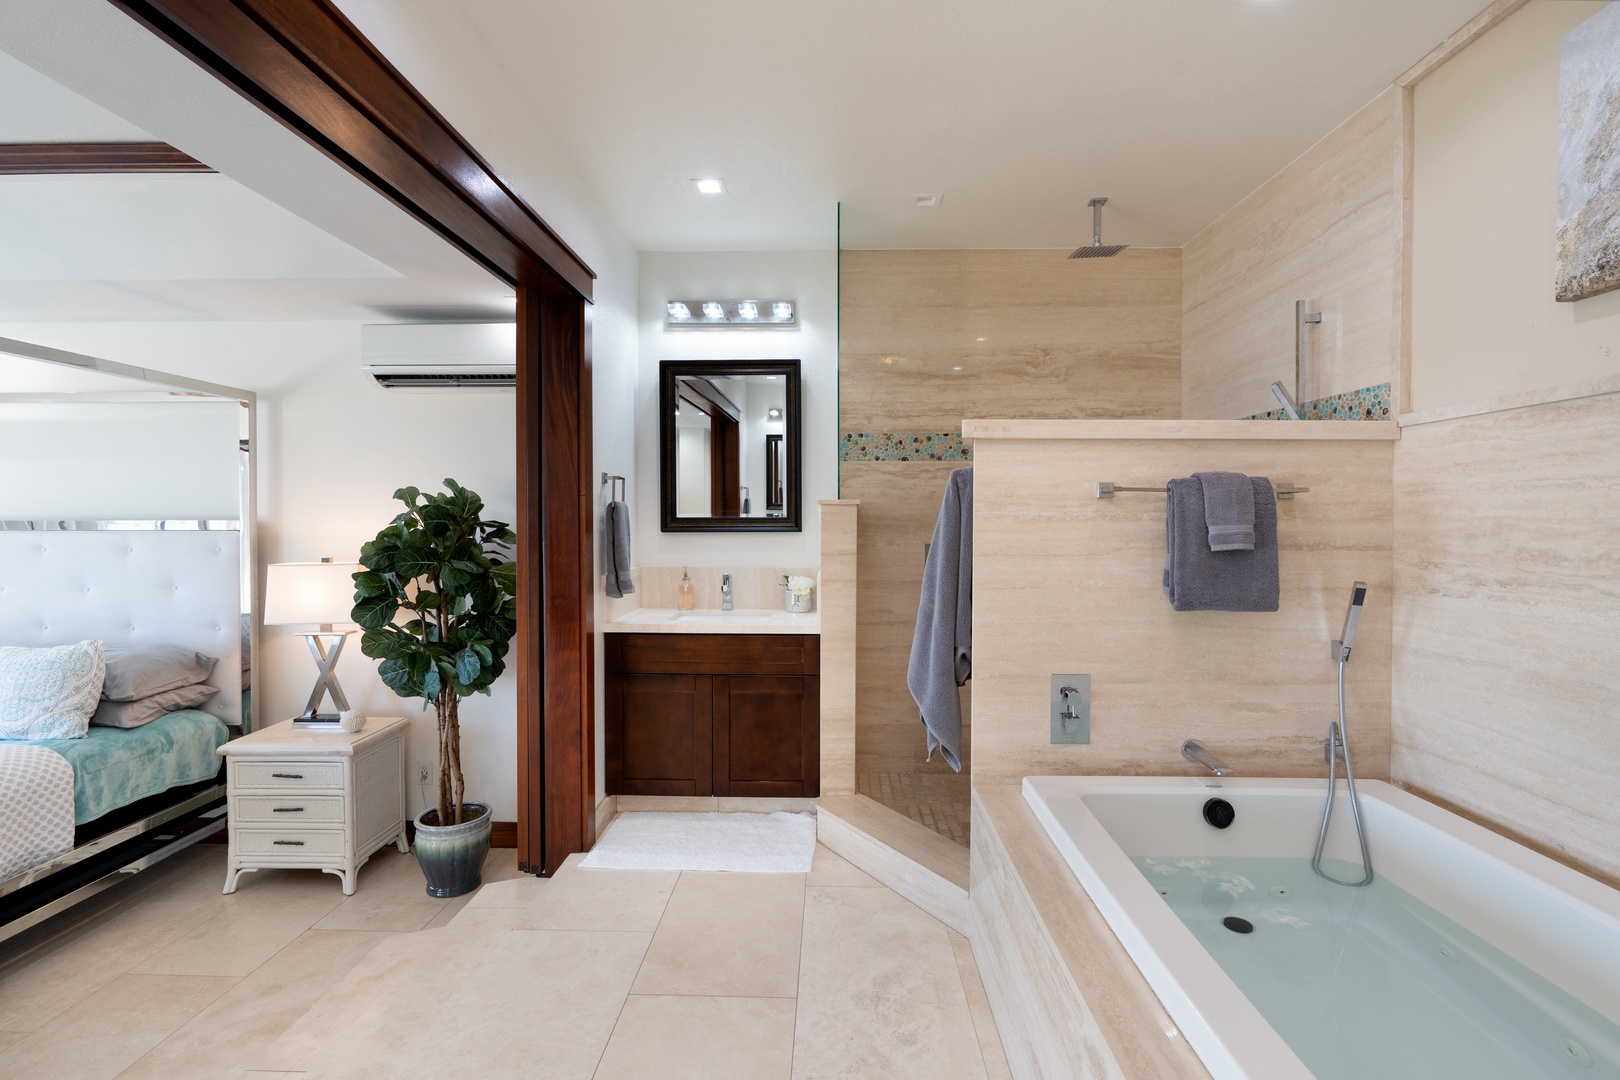 Honolulu Vacation Rentals, Wailupe Seaside - Primary ensuite with soaker tub, and luxury appointments.